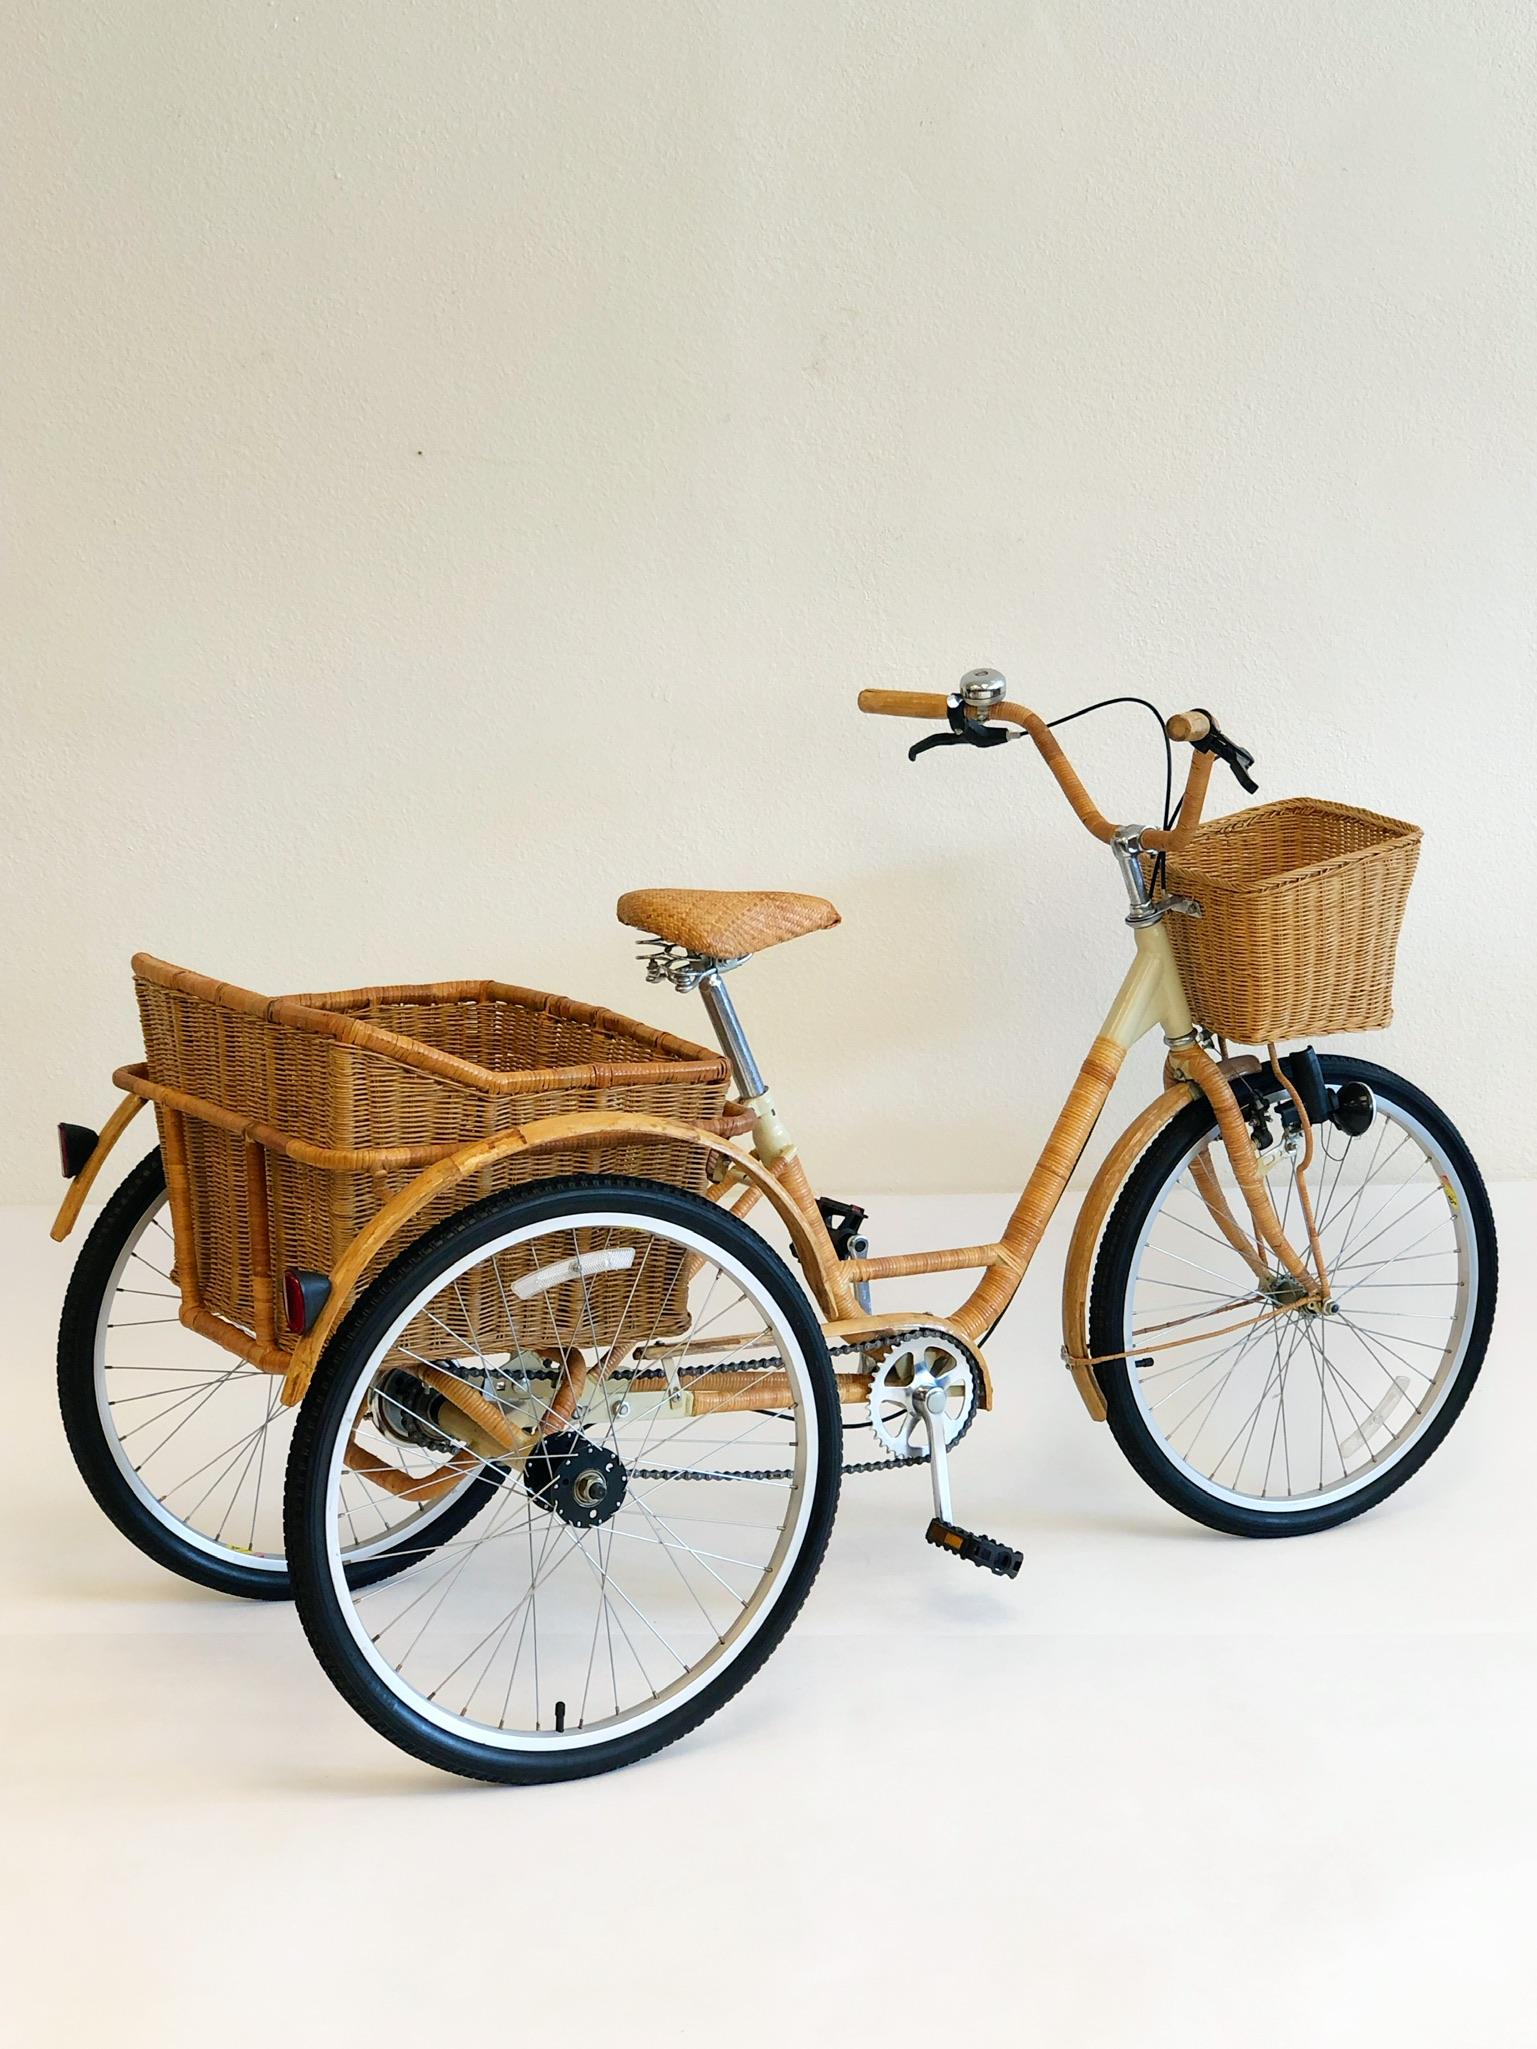 A cool 1980s steel frame Adult  tricycle wrapped with wicker and bamboo. The tricycle has a small wicker basket in the front and a removable large wicker basket in the back.
Overall dimensions: 29”deep 72” wide 40.5” high.